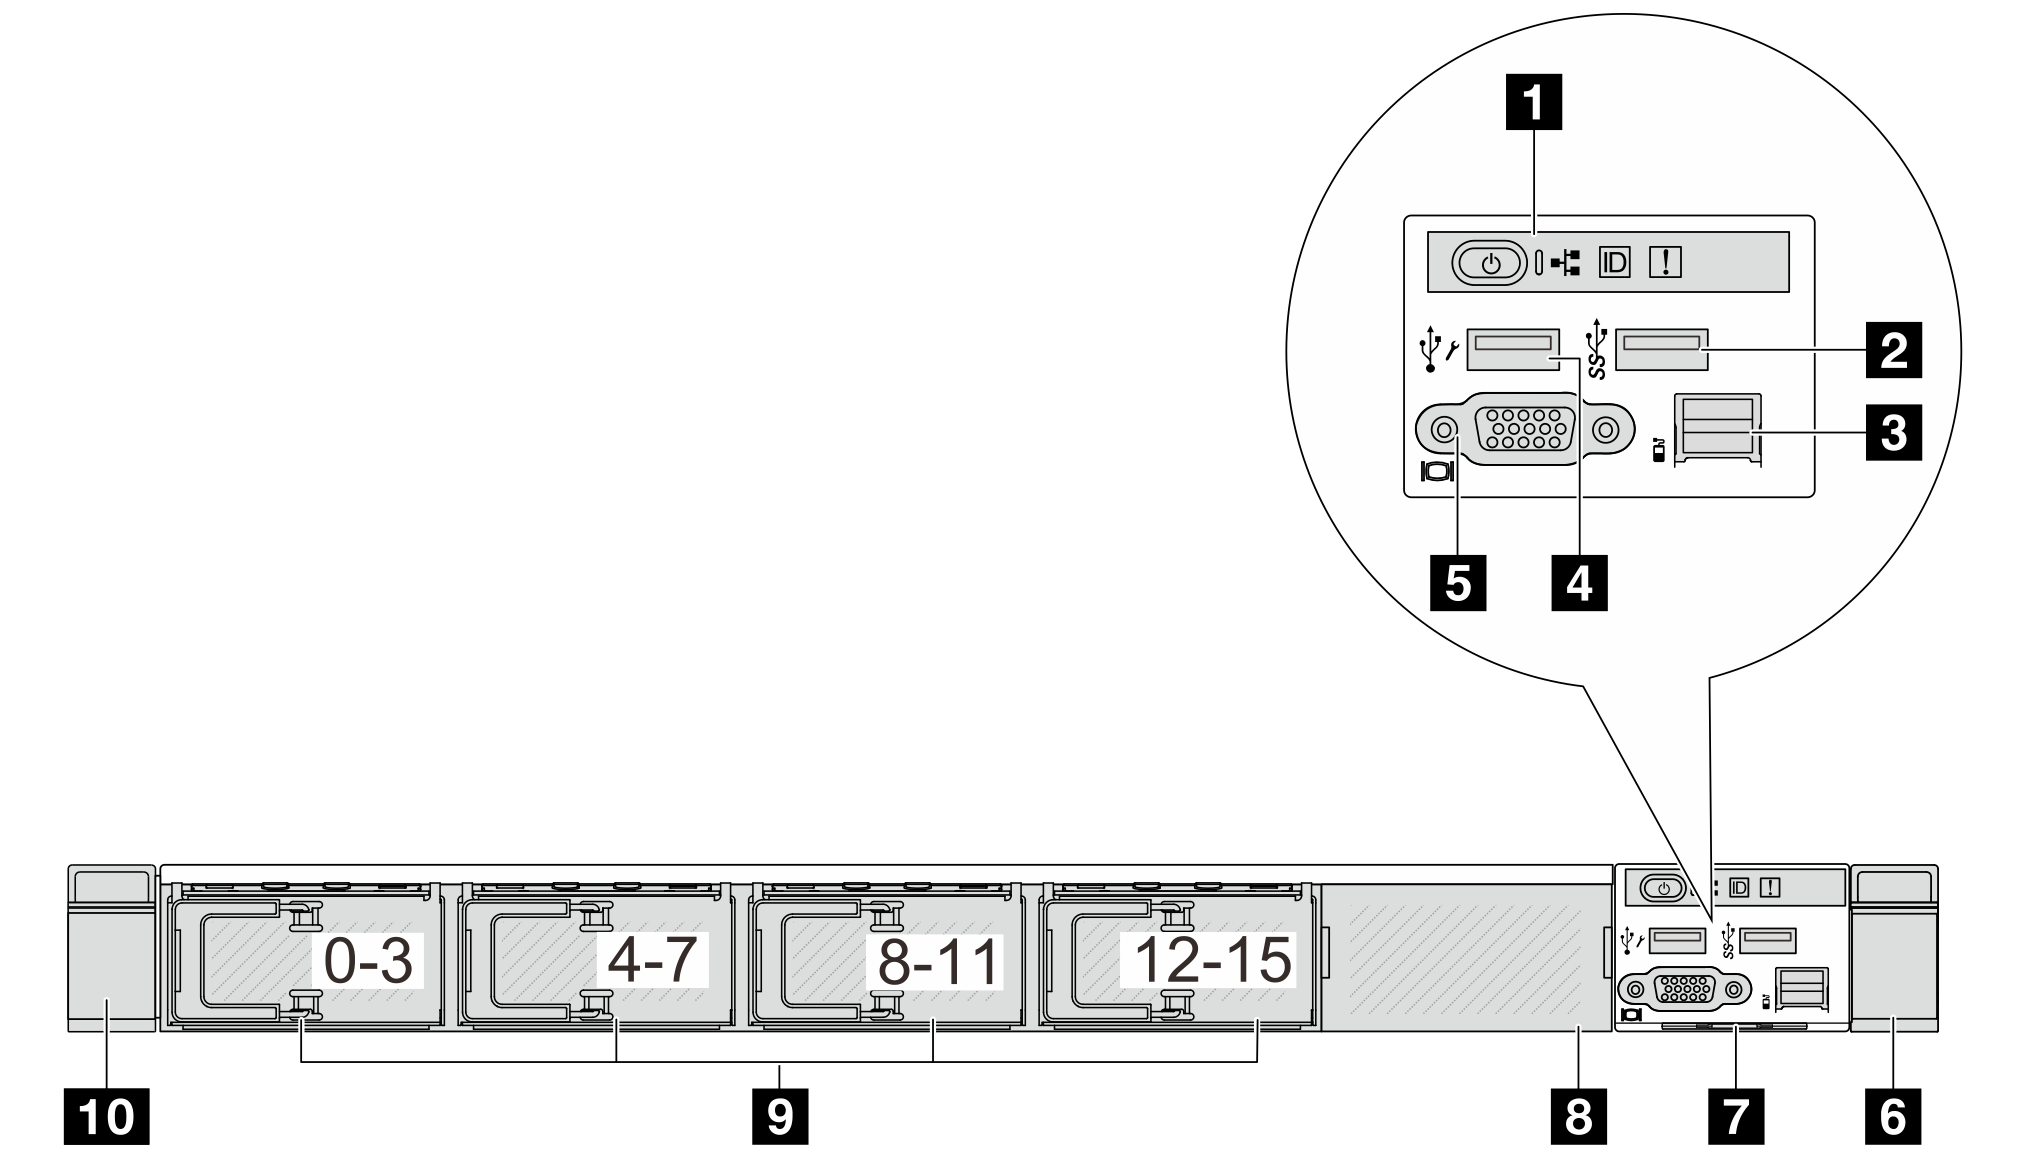 Front view of server model with 16 EDSFF drives